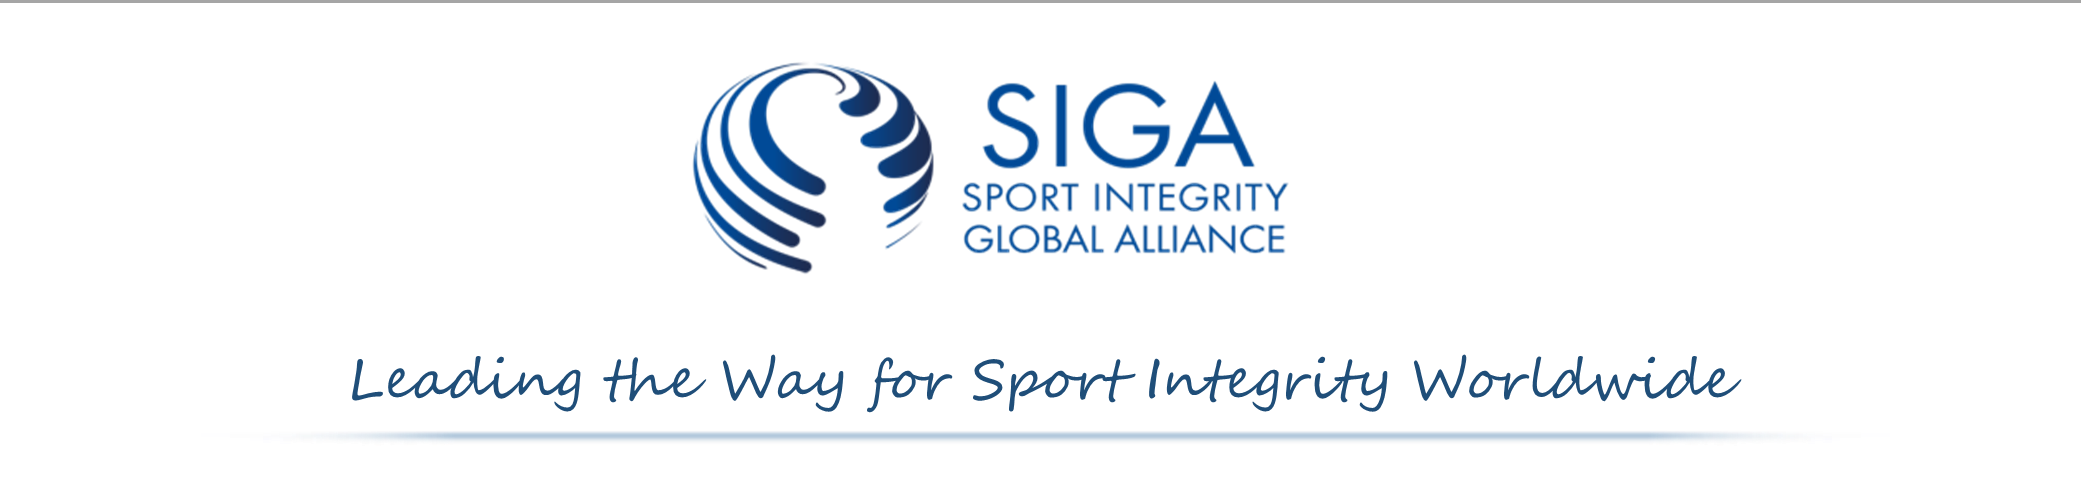 SIGA establishes Standing Committee on Race, Gender, Diversity, and Inclusion in Sport